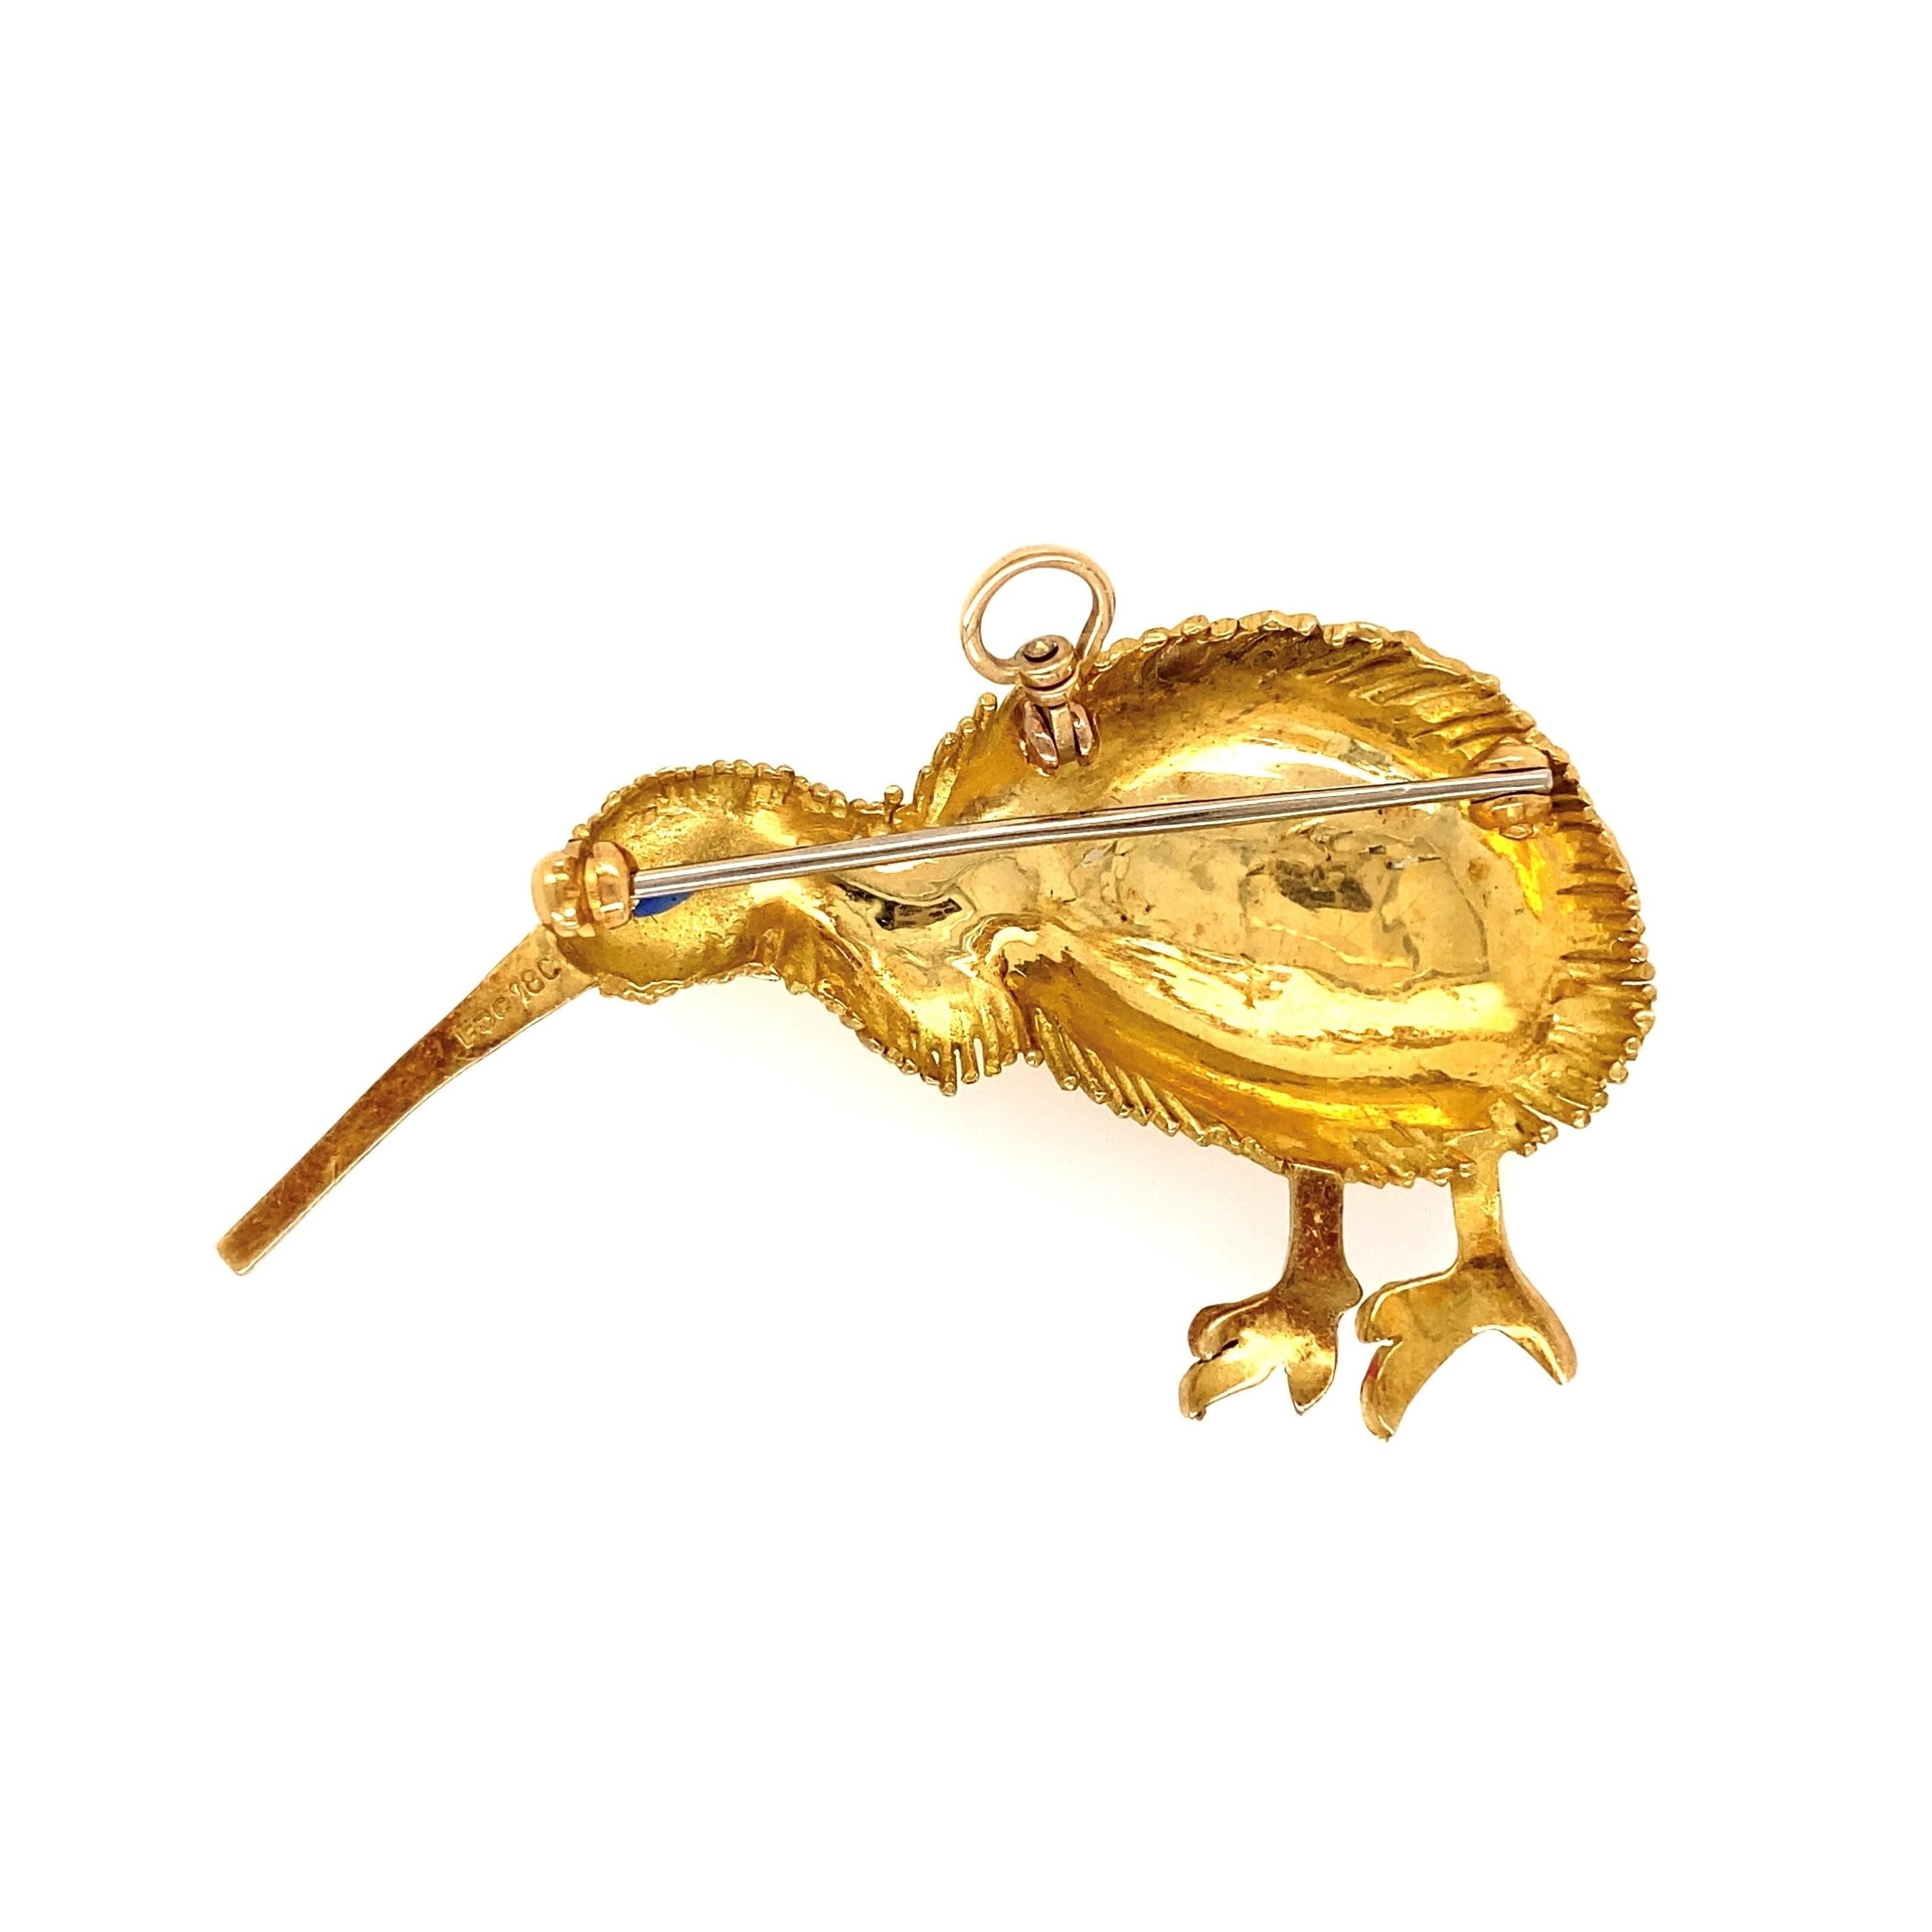 Awesome Finely detailed Brooch of an Ibis Bird with Almond shaped Sapphire Eyes. Hand crafted in 18K Gold and Enamel. Approx. 2.1” long. This brooch epitomizes vintage charm and would make a lovely compliment to any outfit. In excellent condition.